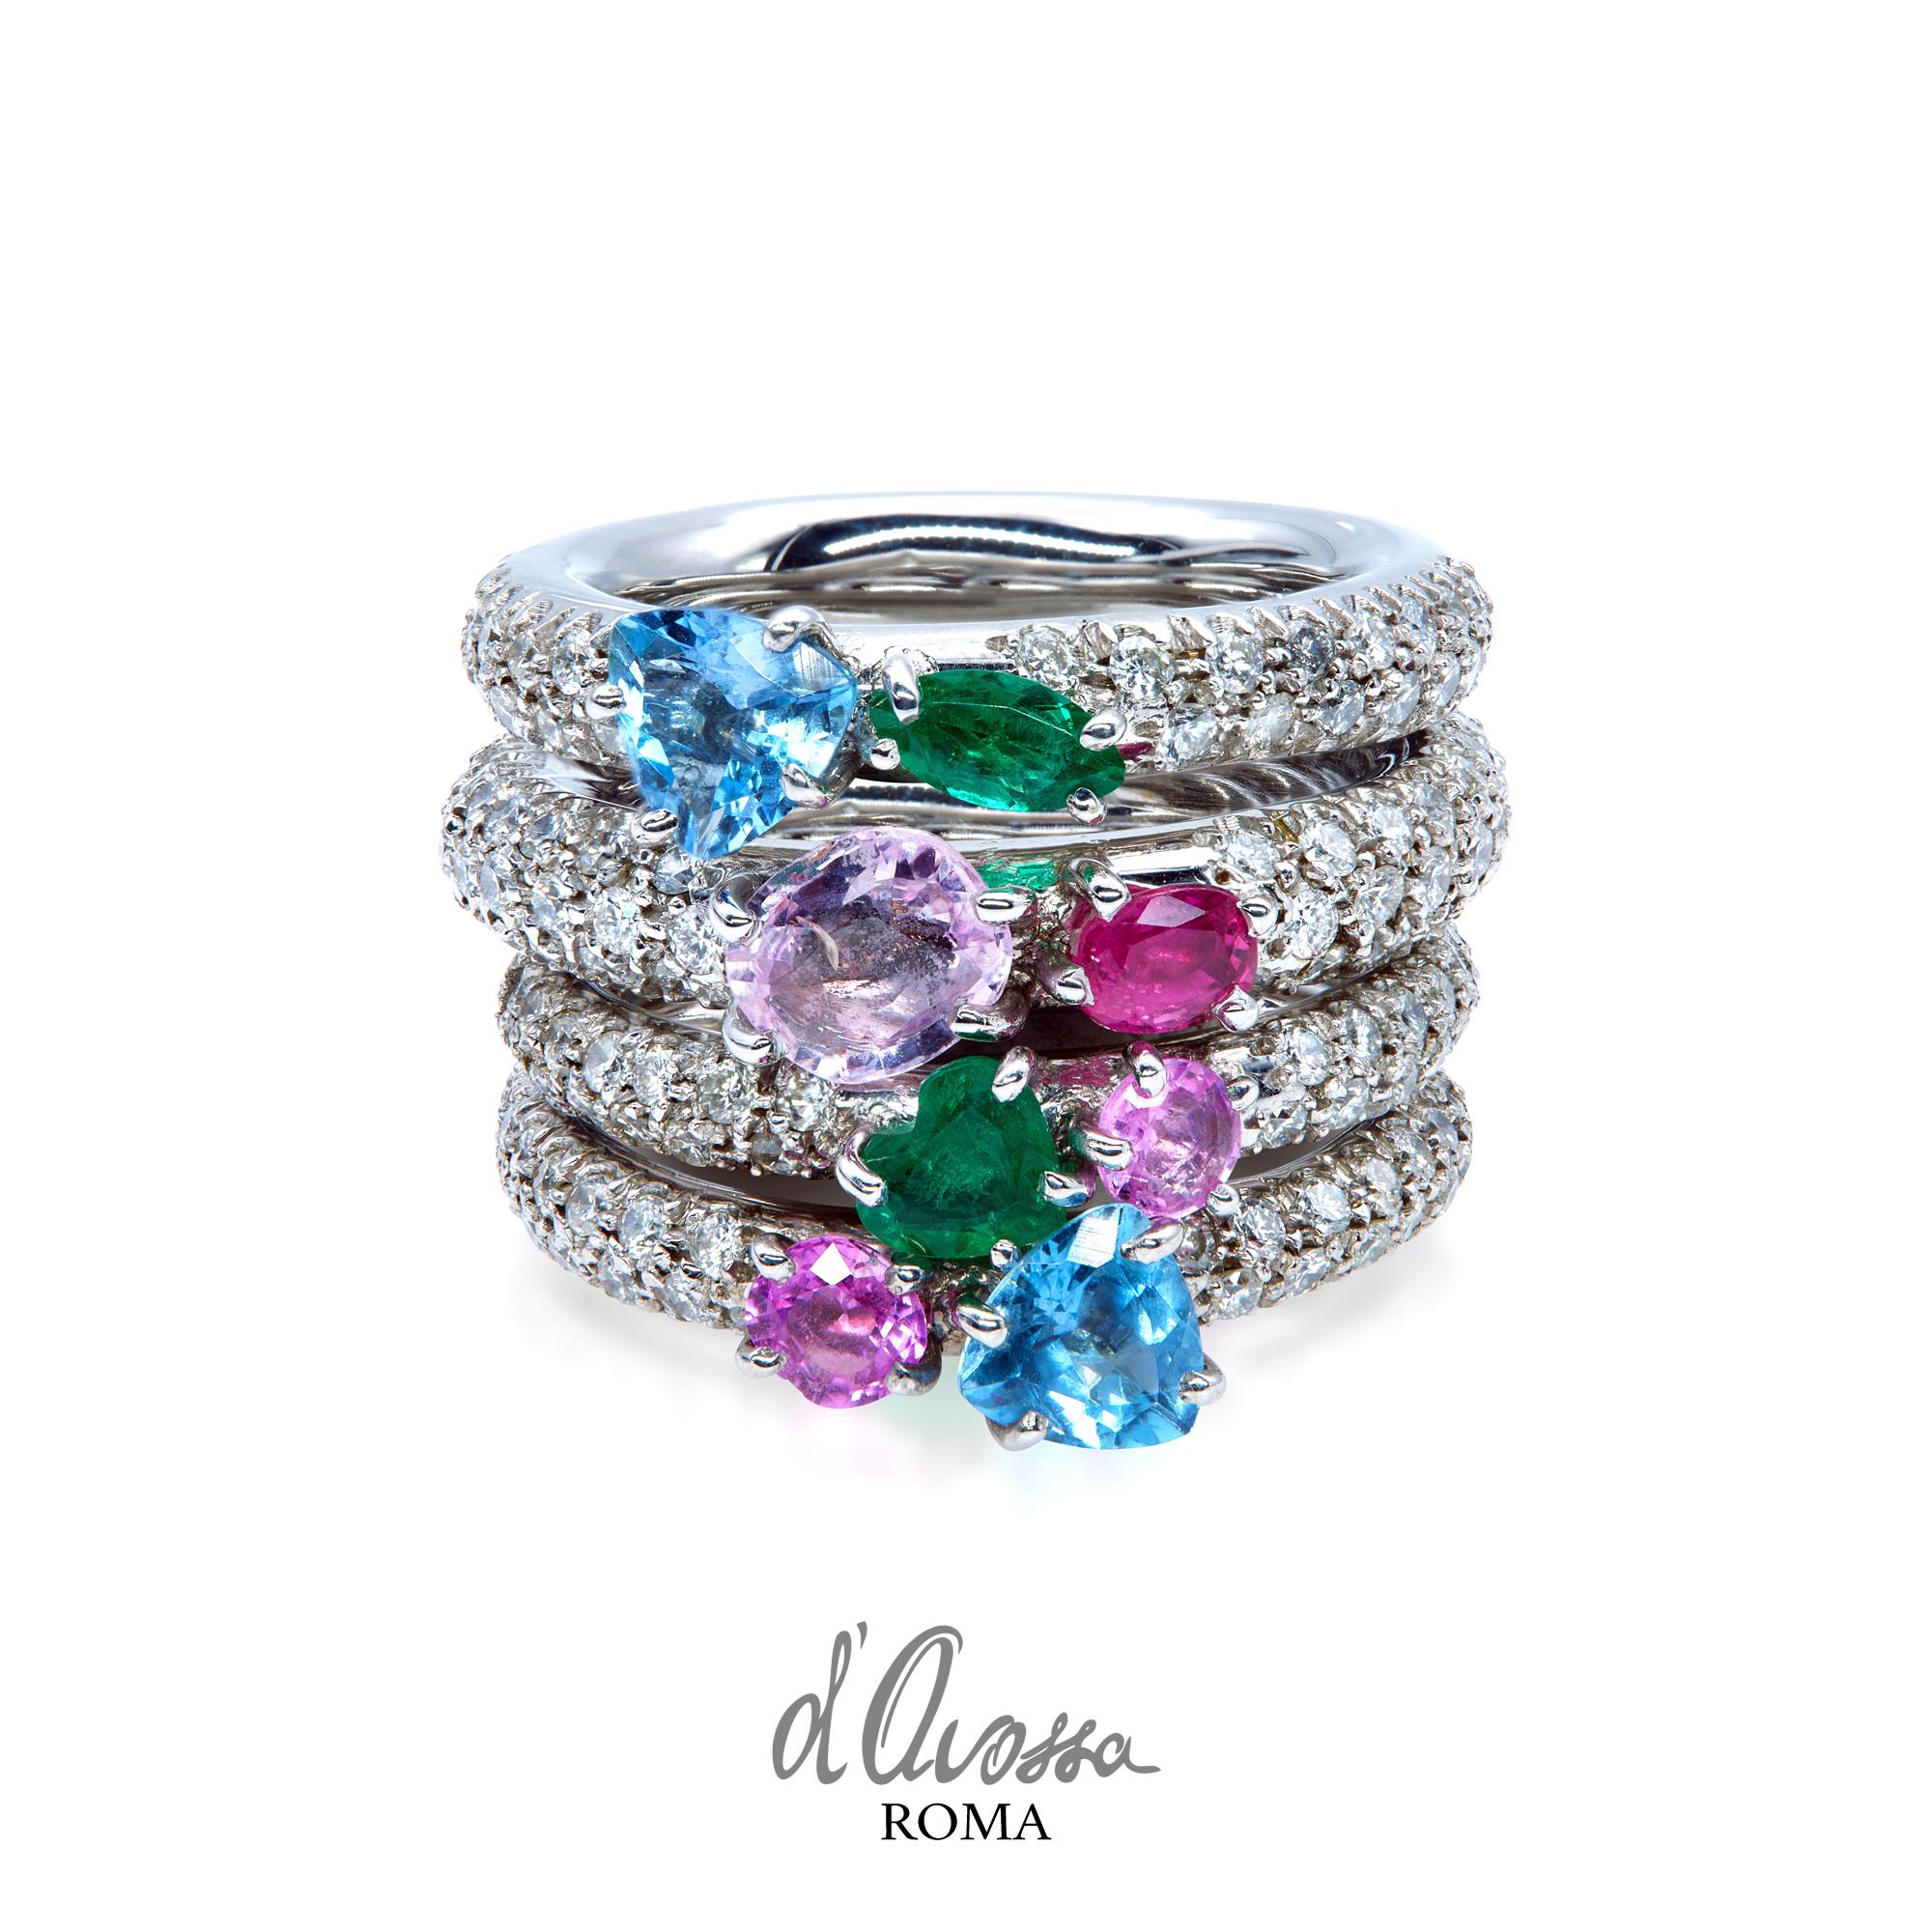 Mixed Cut Blue Aquamarine and Pink Sapphire on White Diamonds Pavé d'Avossa Ring For Sale